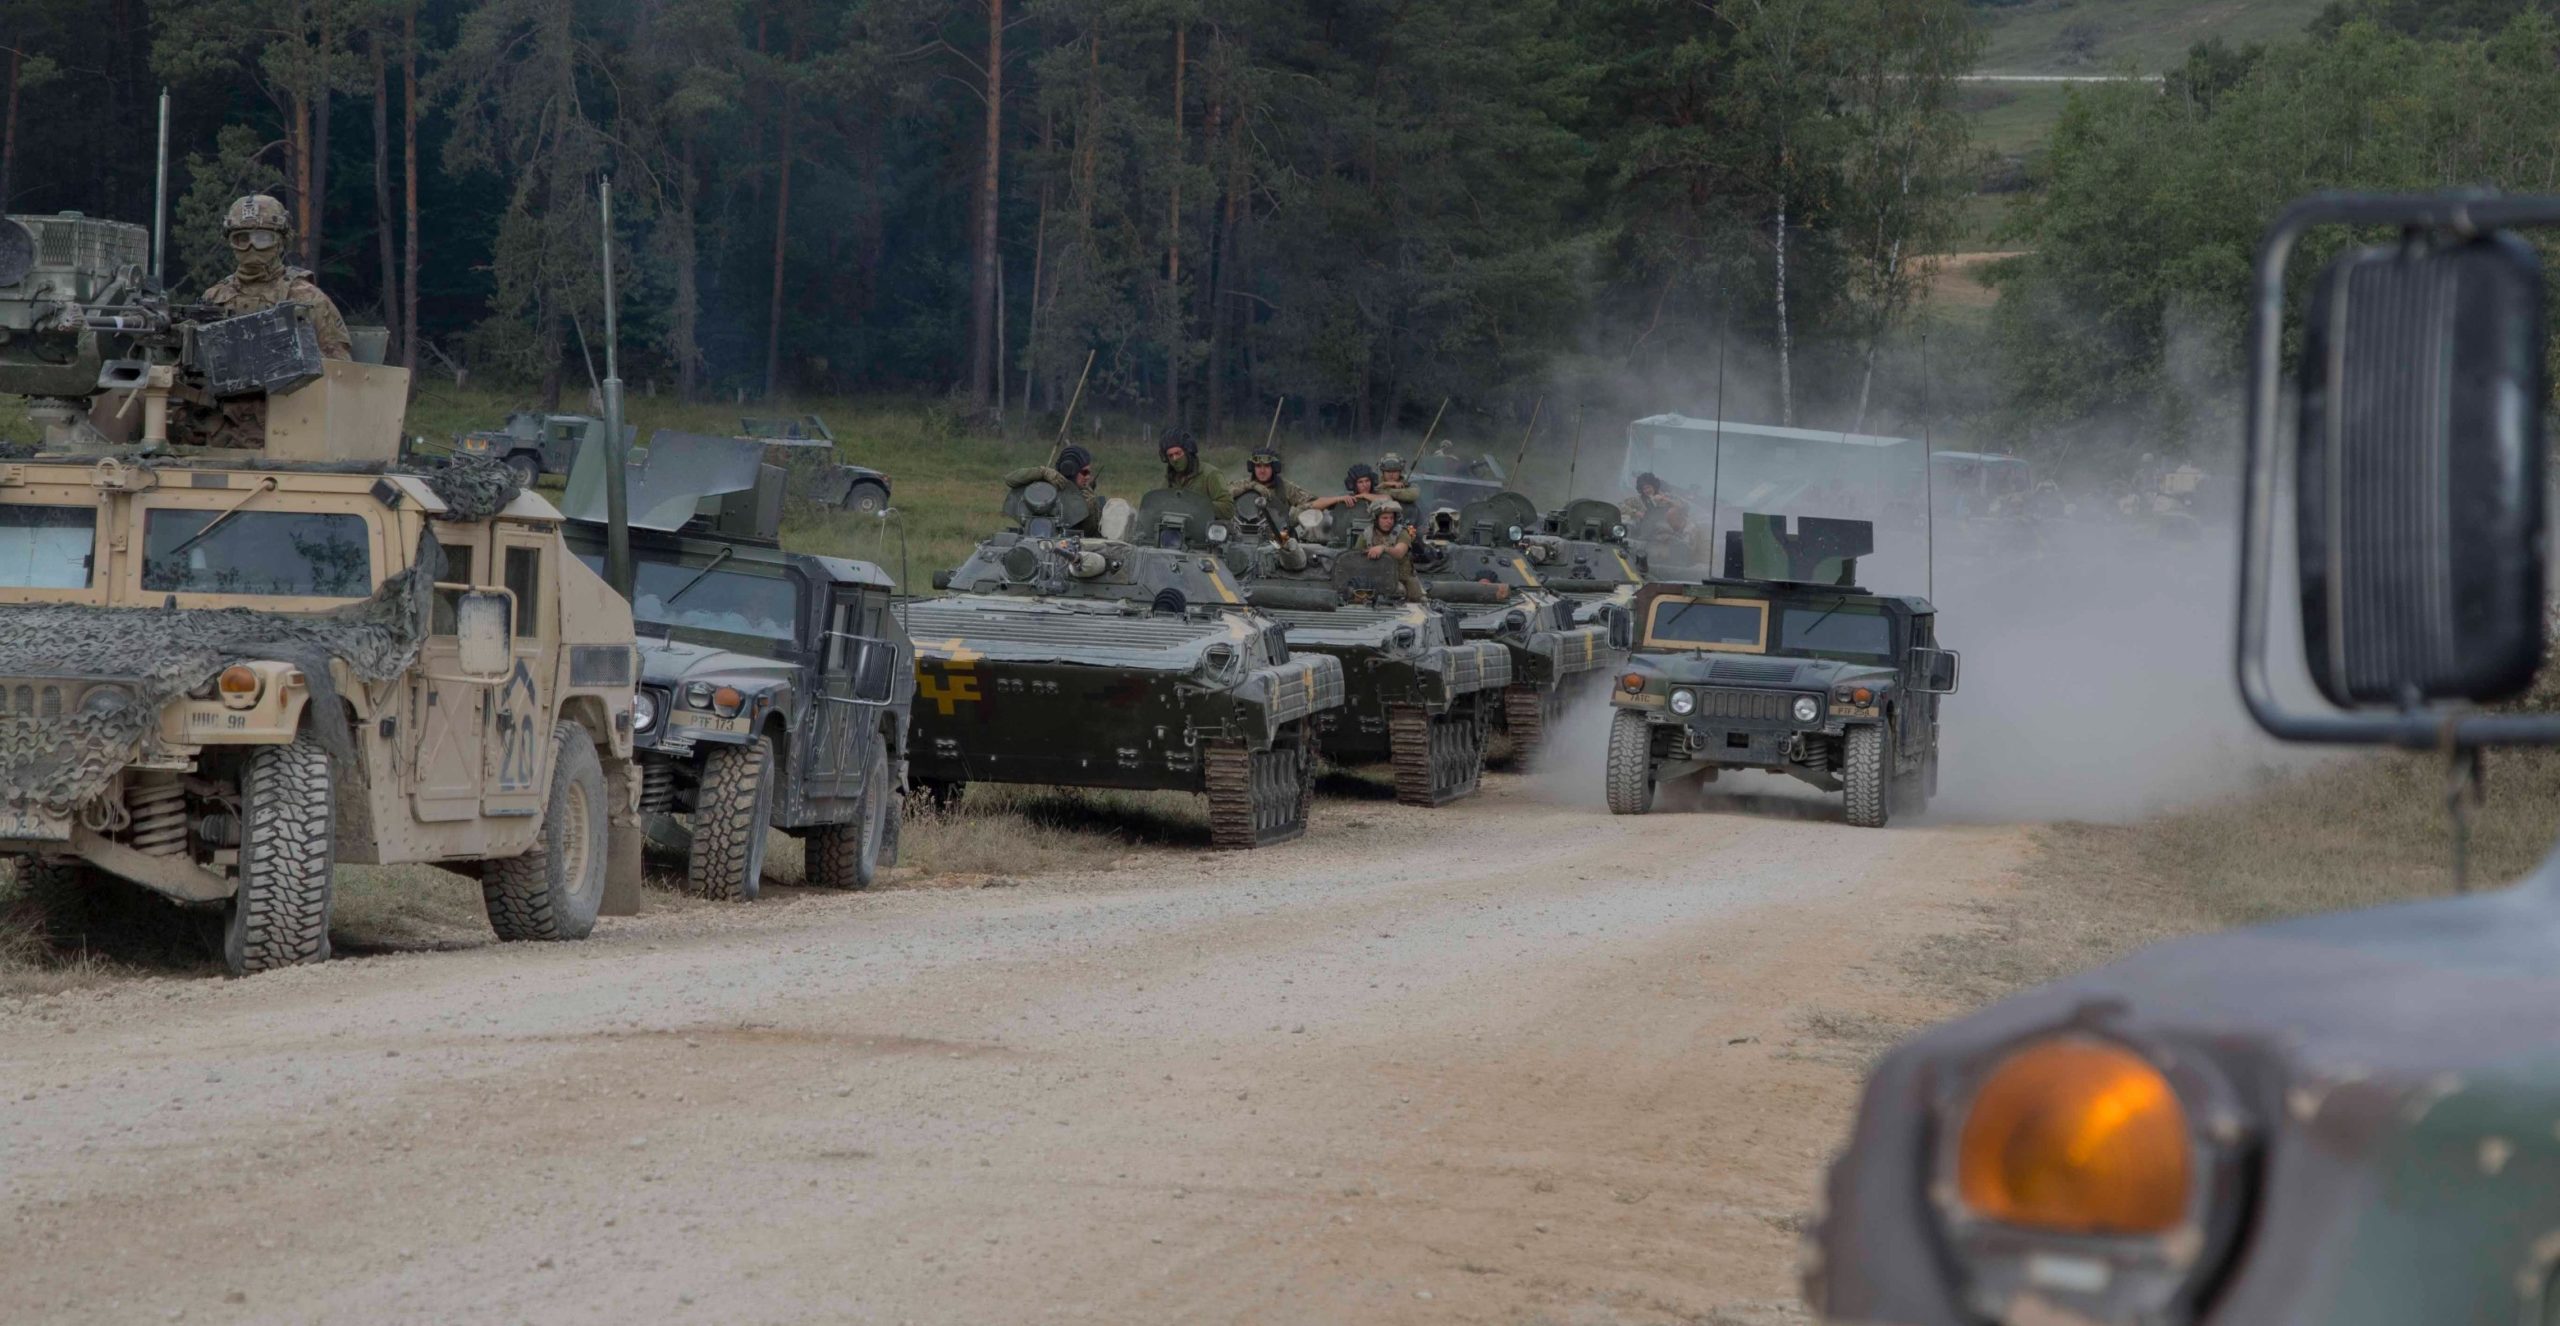 Ukrainian military participating in the international military exercise Combined Resolve XIV at the US Army Training Center in Germany. (Source: mil.gov.ua)